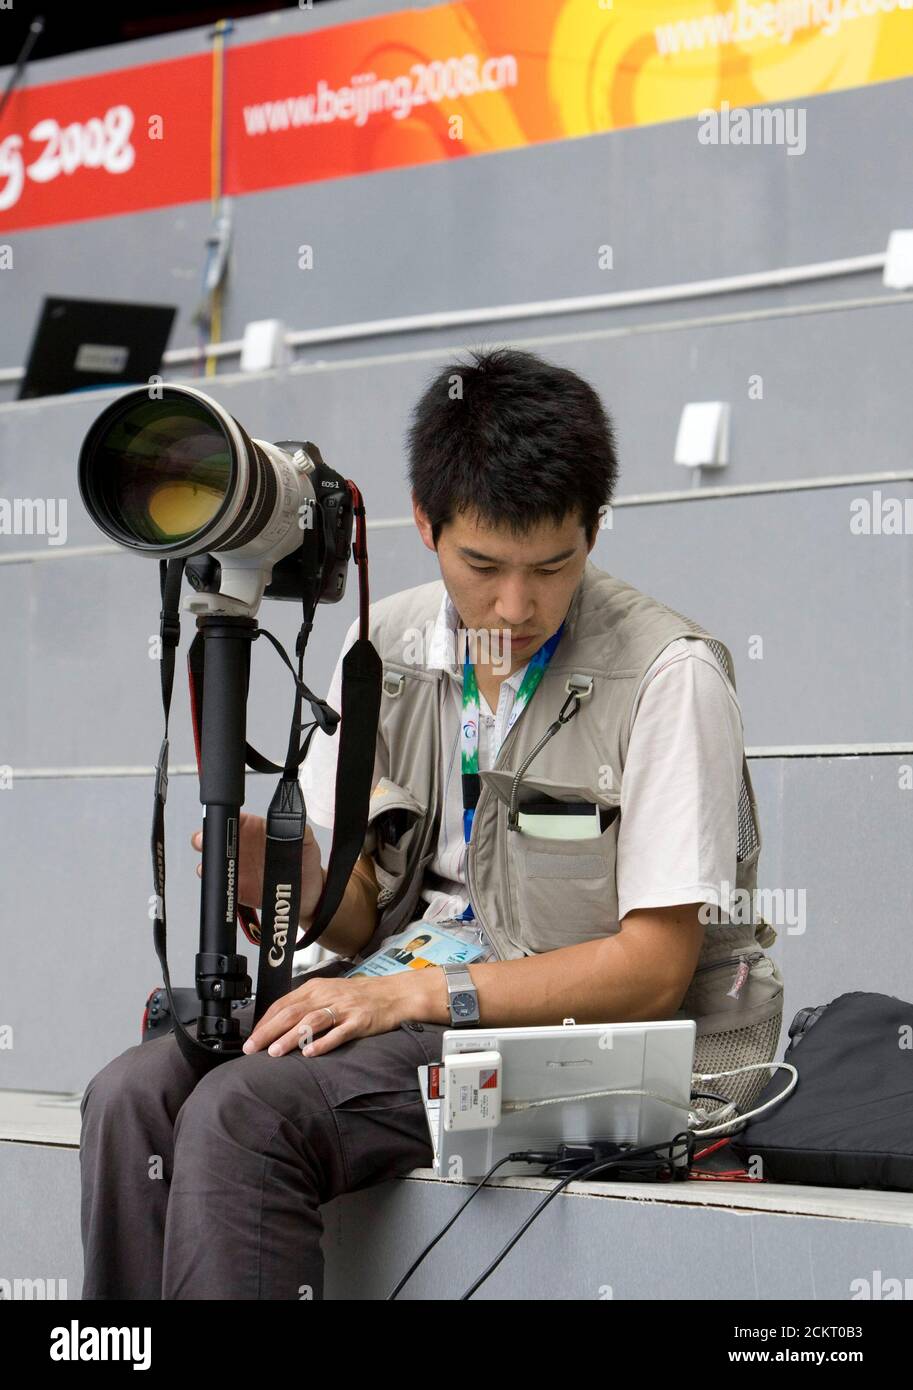 Beijing, China  September 6, 2008: Japanese photographer who works for Asahi Shimbun at the Opening Ceremonies of the Beijing Paralympics at China's National Stadium, known as the Bird's Nest.  ©Bob Daemmrich Stock Photo